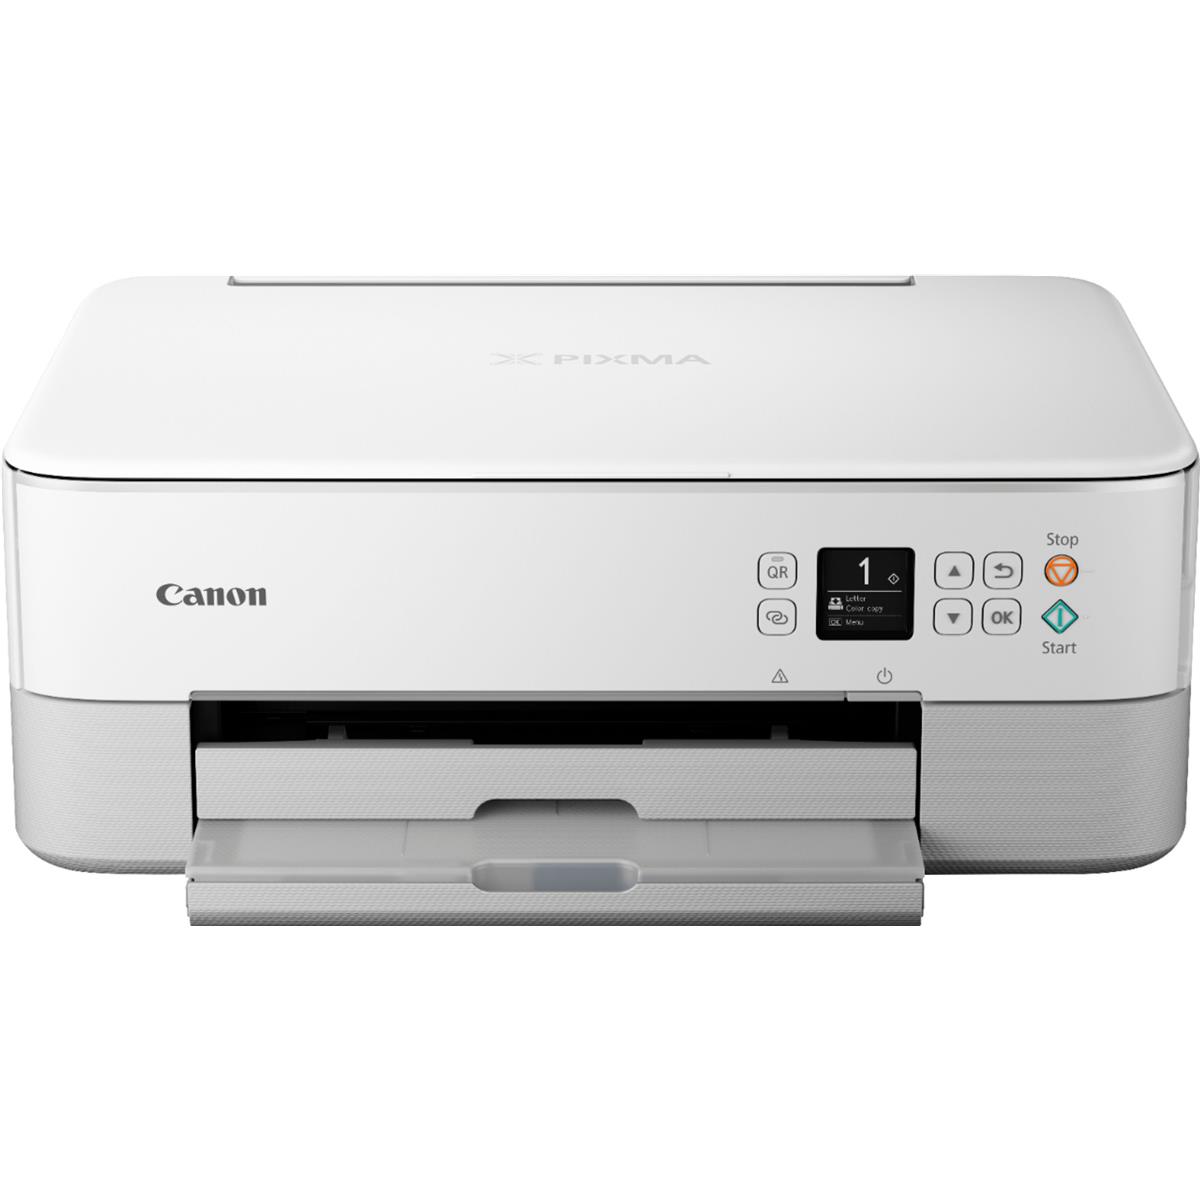 Canon PIXMA TS6420a Wireless All-In-One Inkjet Printer, Whit